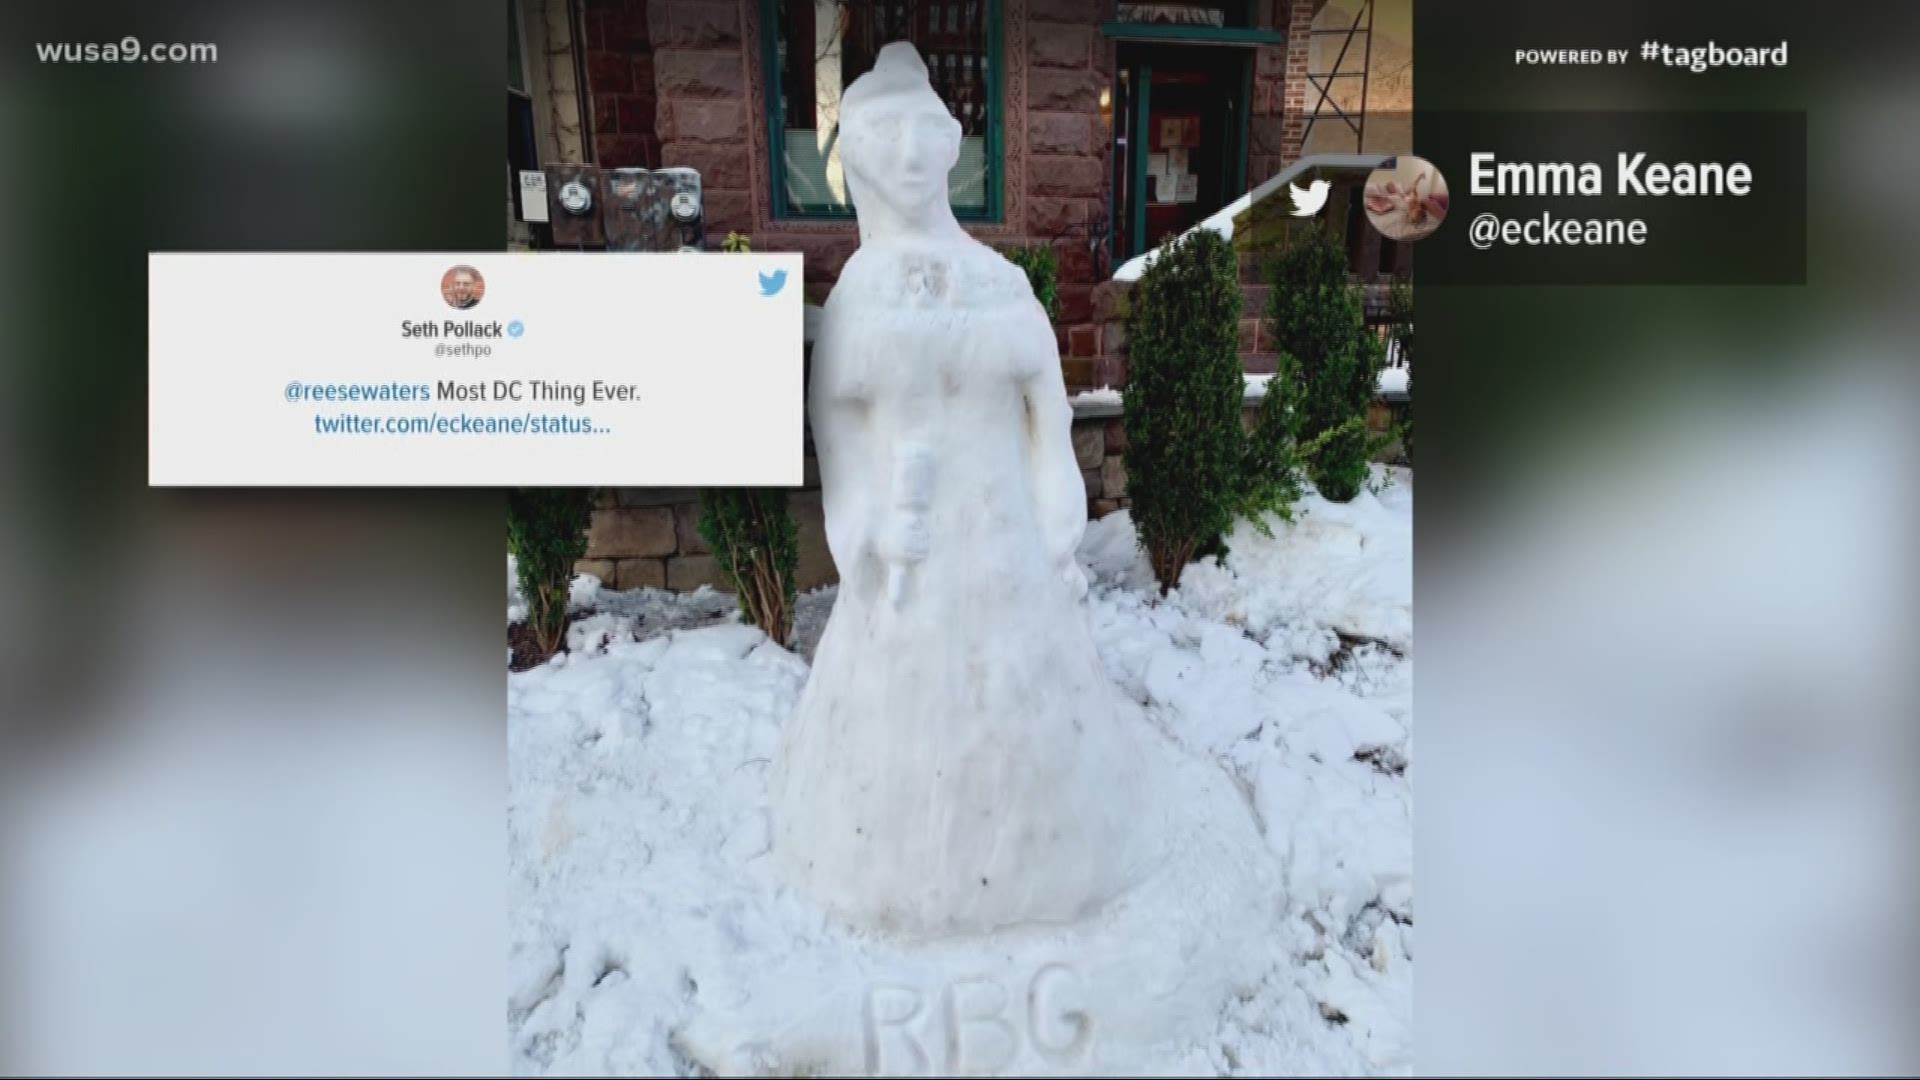 Ever seen a snowman that looks like Ruth Bader Ginsburg?